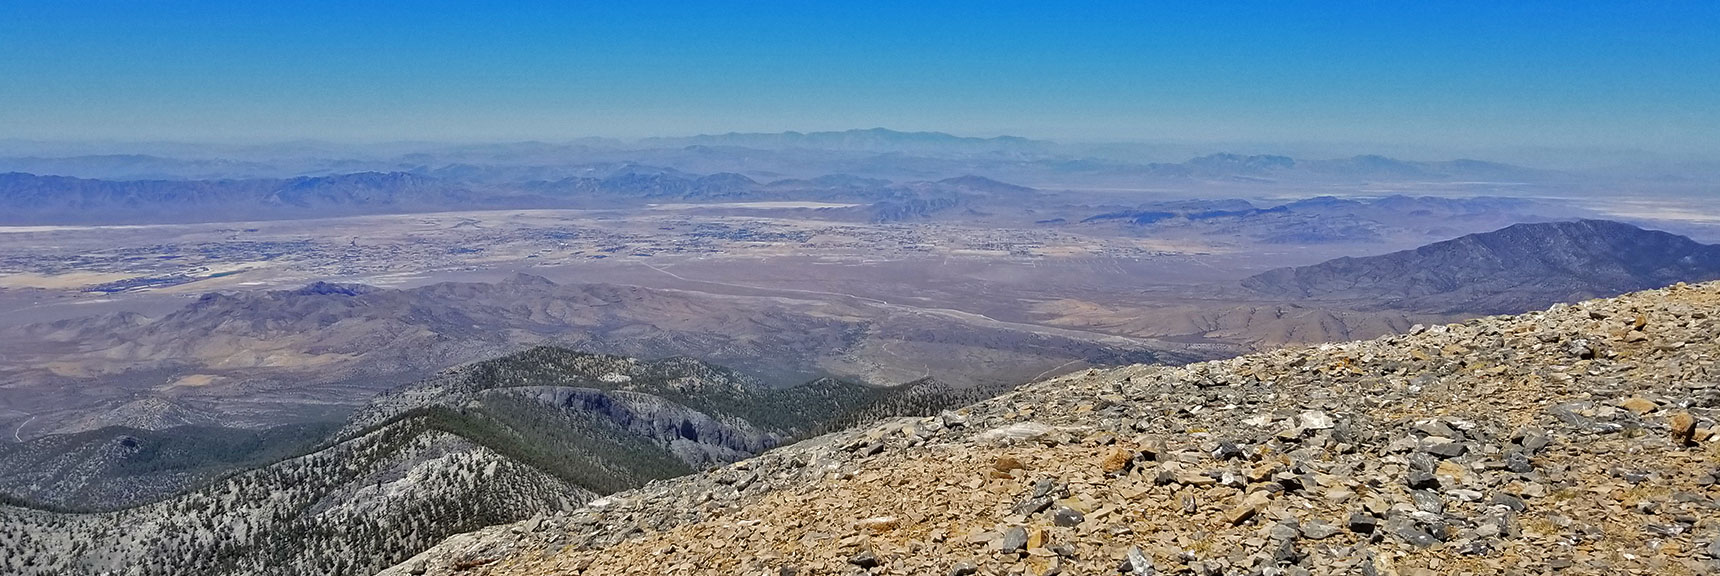 Pahrump with Telescope Peak in Background from Charleston Peak | Griffith Peak & Charleston Peak Circuit Run, Spring Mountains, Nevada